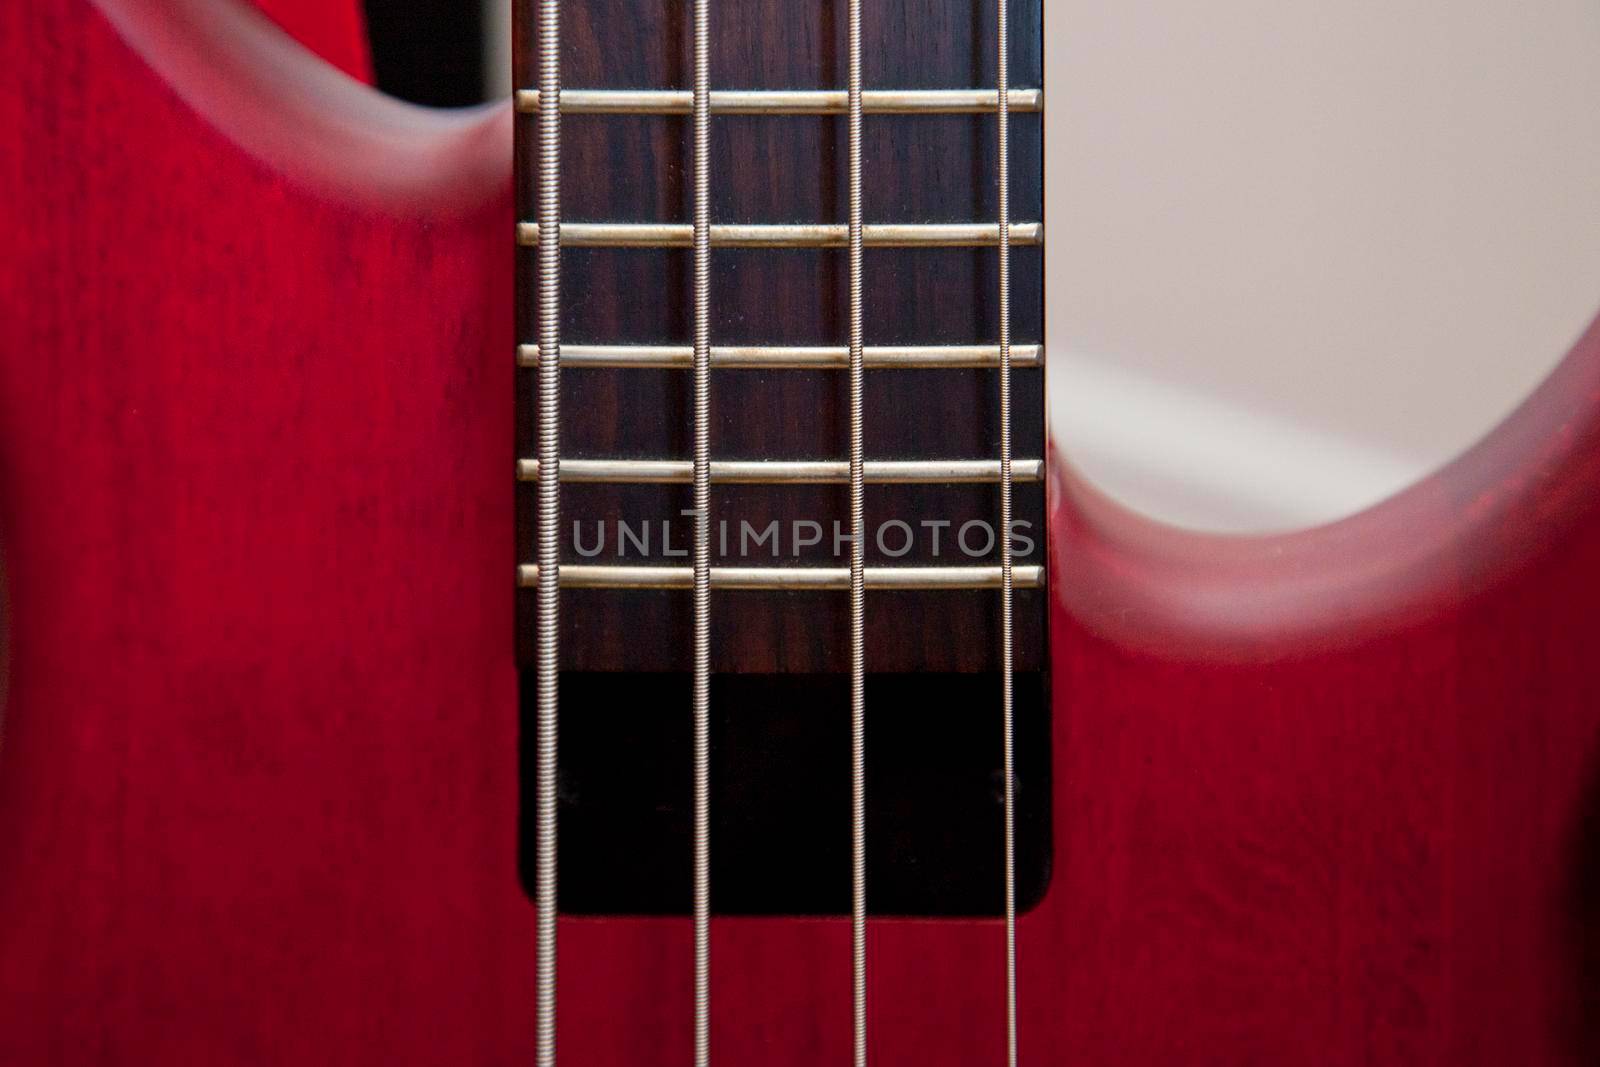  Bass guitar strings and frets on a beautiful red instrument